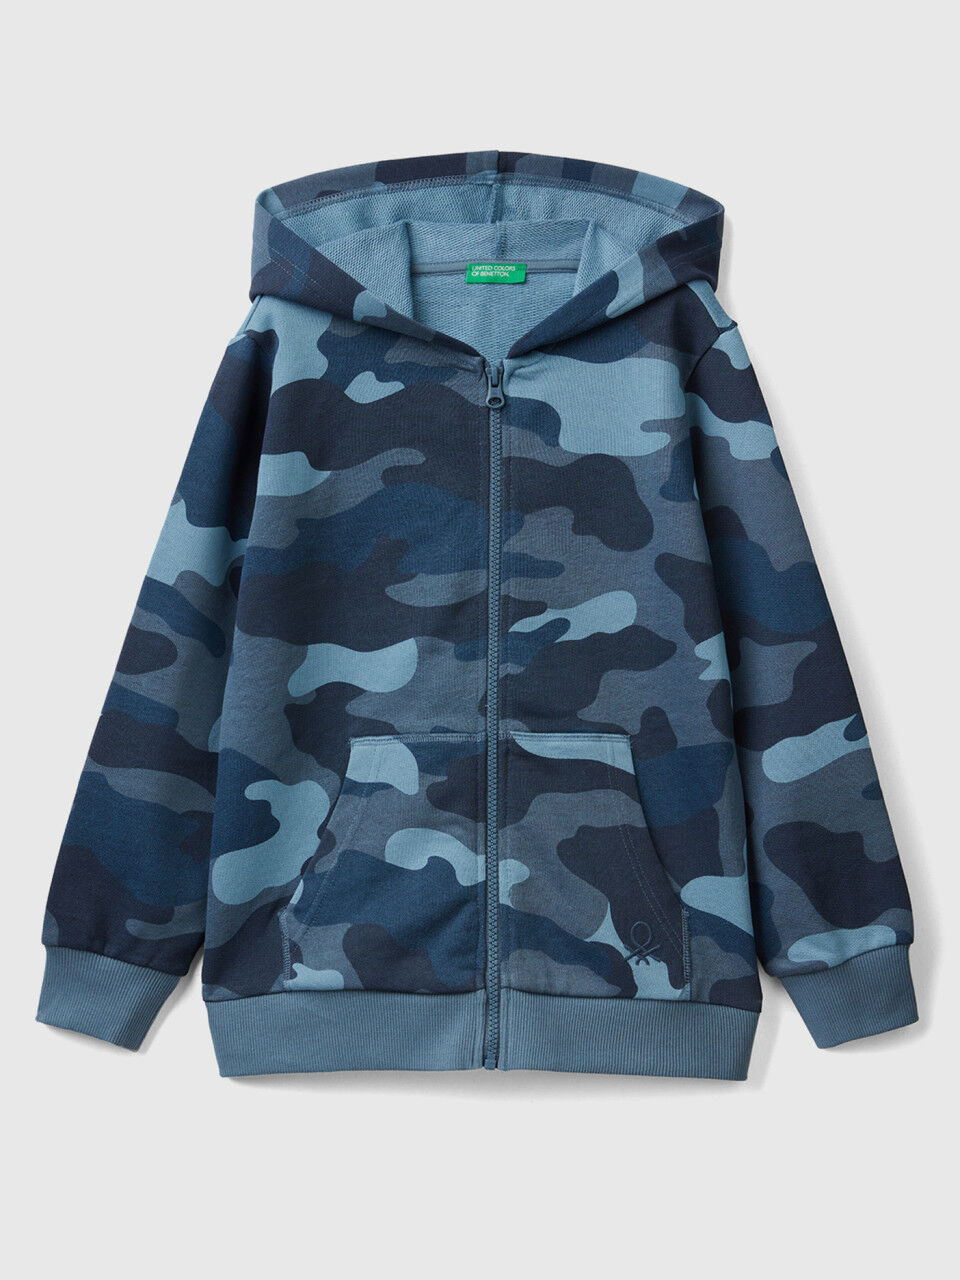 Camouflage hoodie in 100% cotton